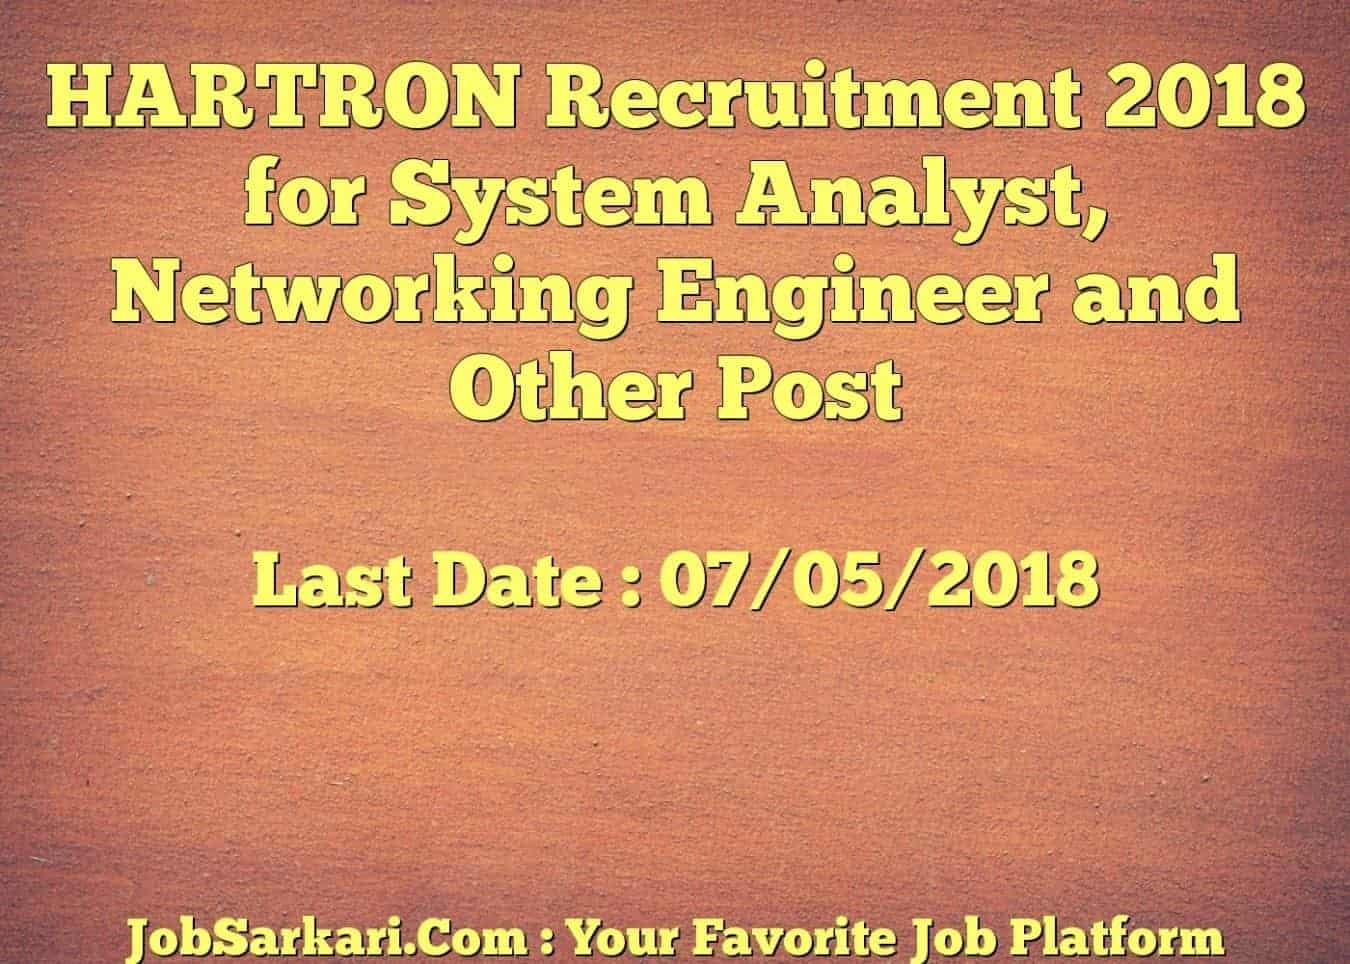 HARTRON Recruitment 2018 for System Analyst, Networking Engineer and Other Post